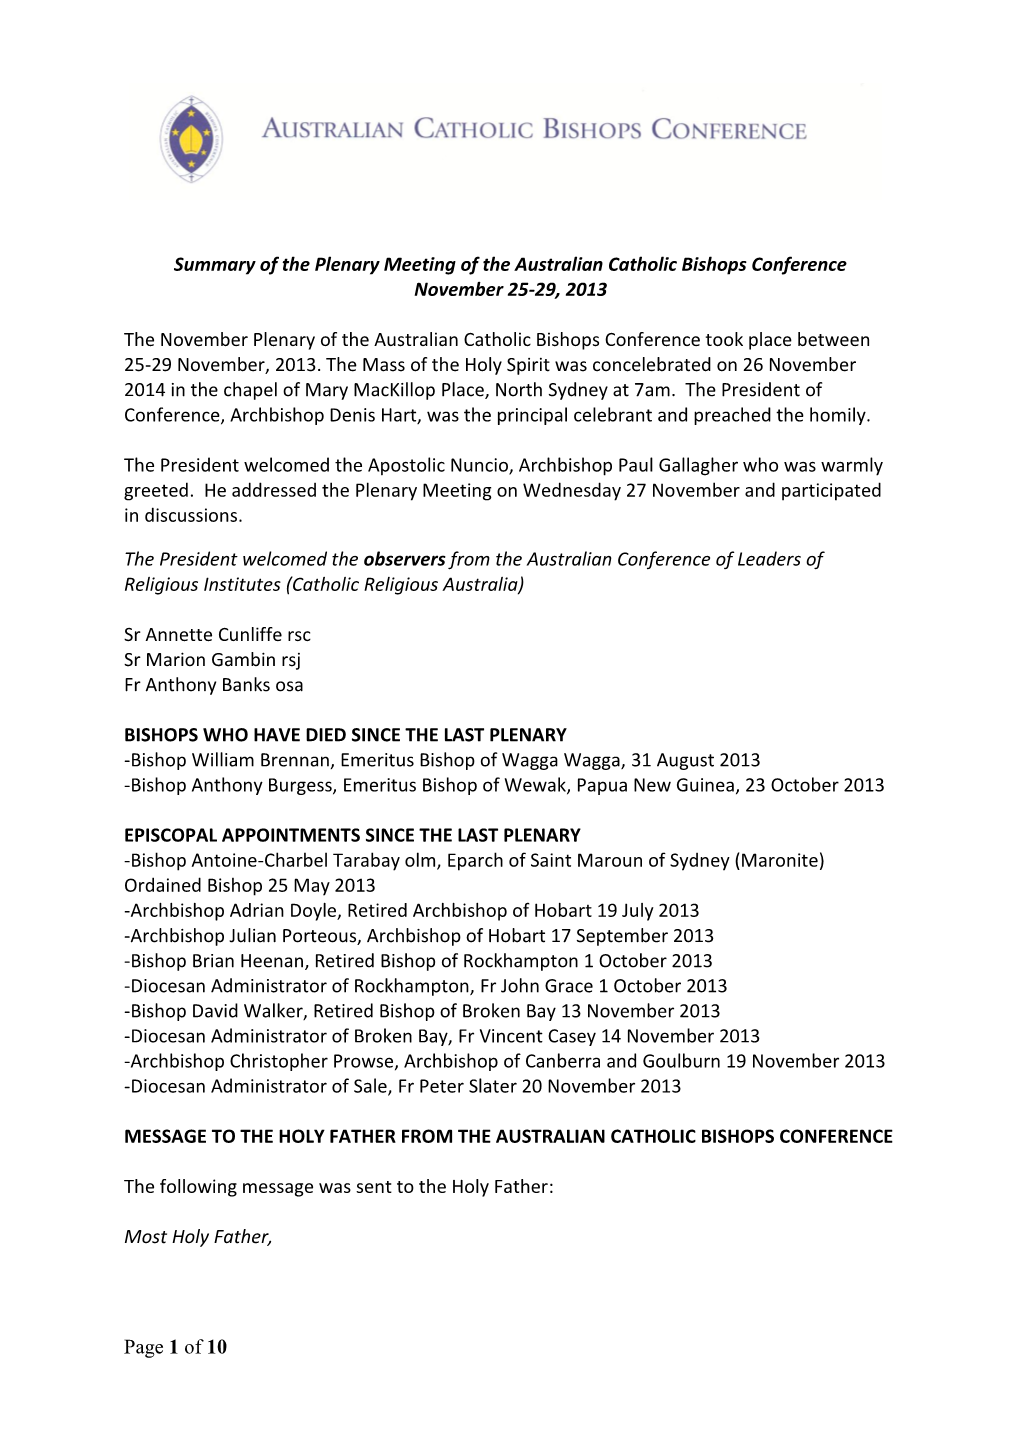 Page 1 of 10 Summary of the Plenary Meeting of the Australian Catholic Bishops Conference November 25-29, 2013 the November Plen